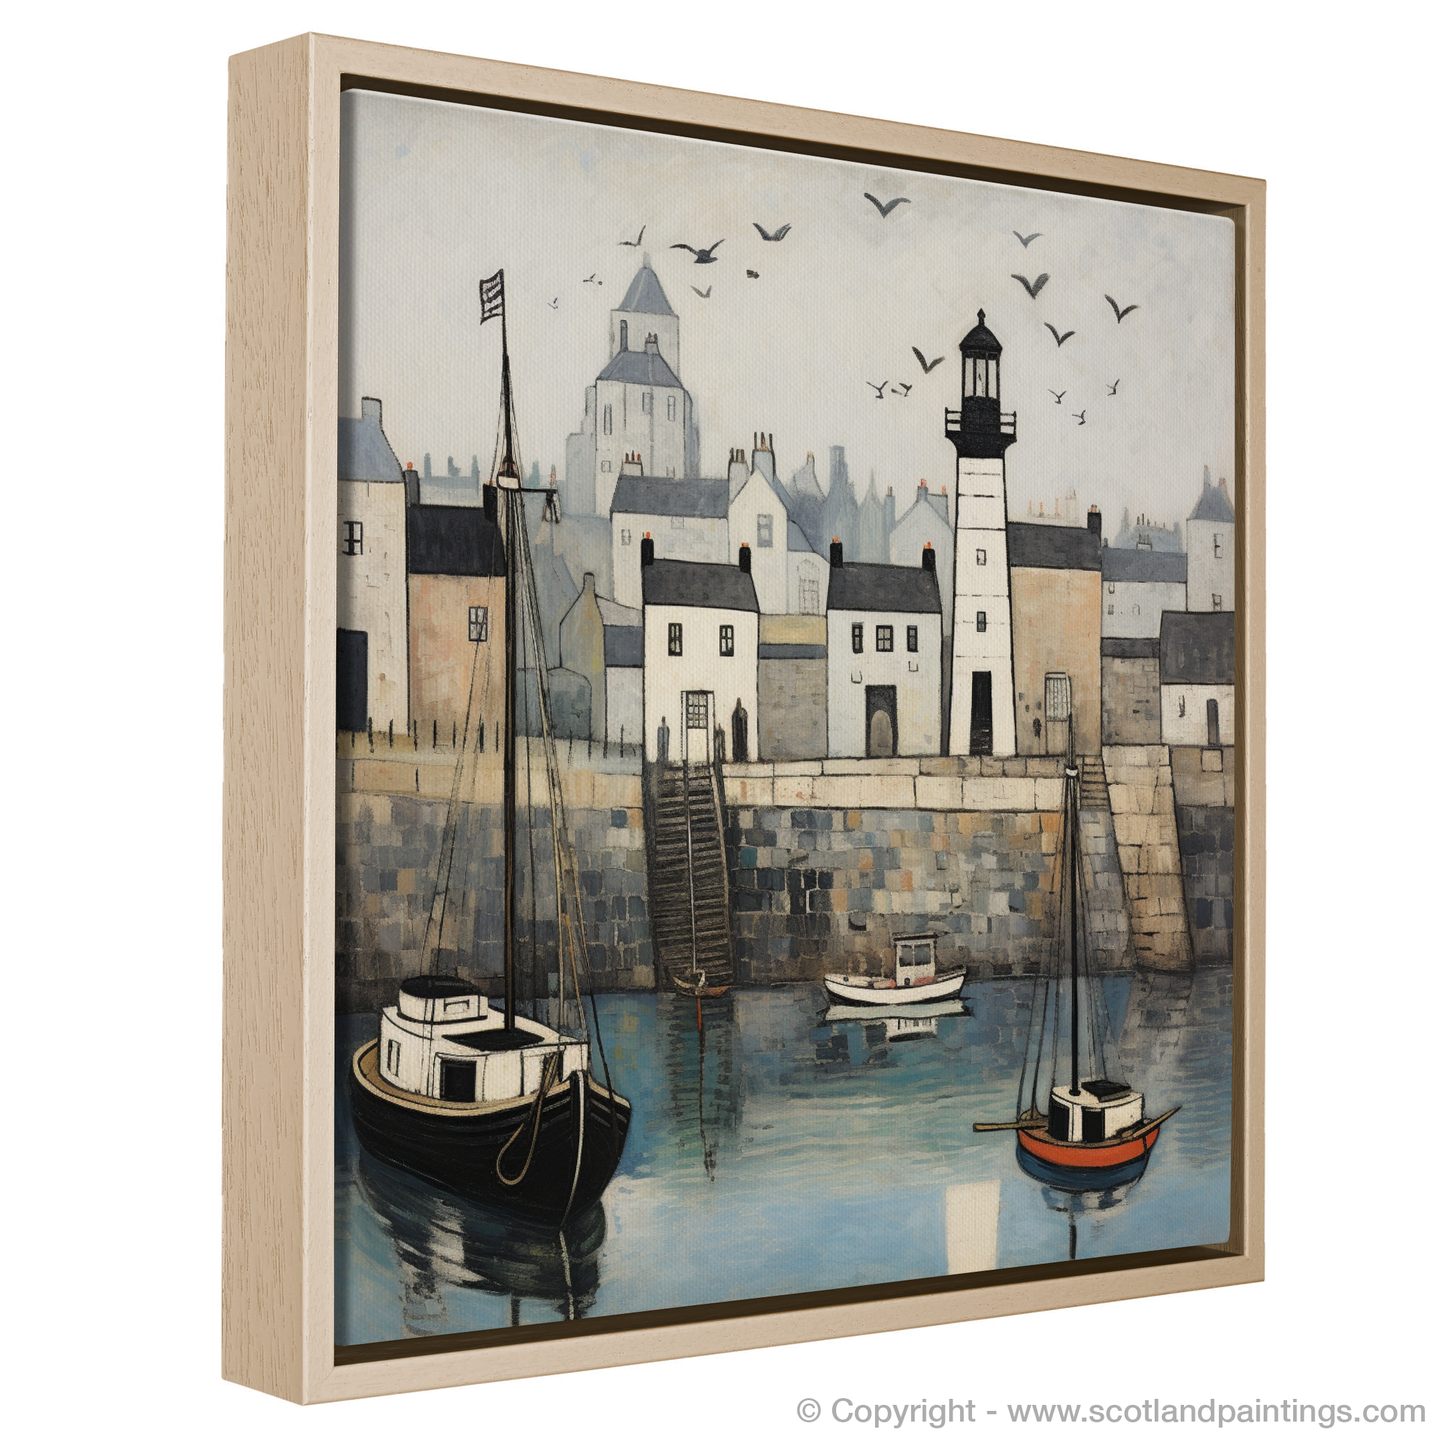 Charlestown Harbour Whimsy: A Naive Art Voyage